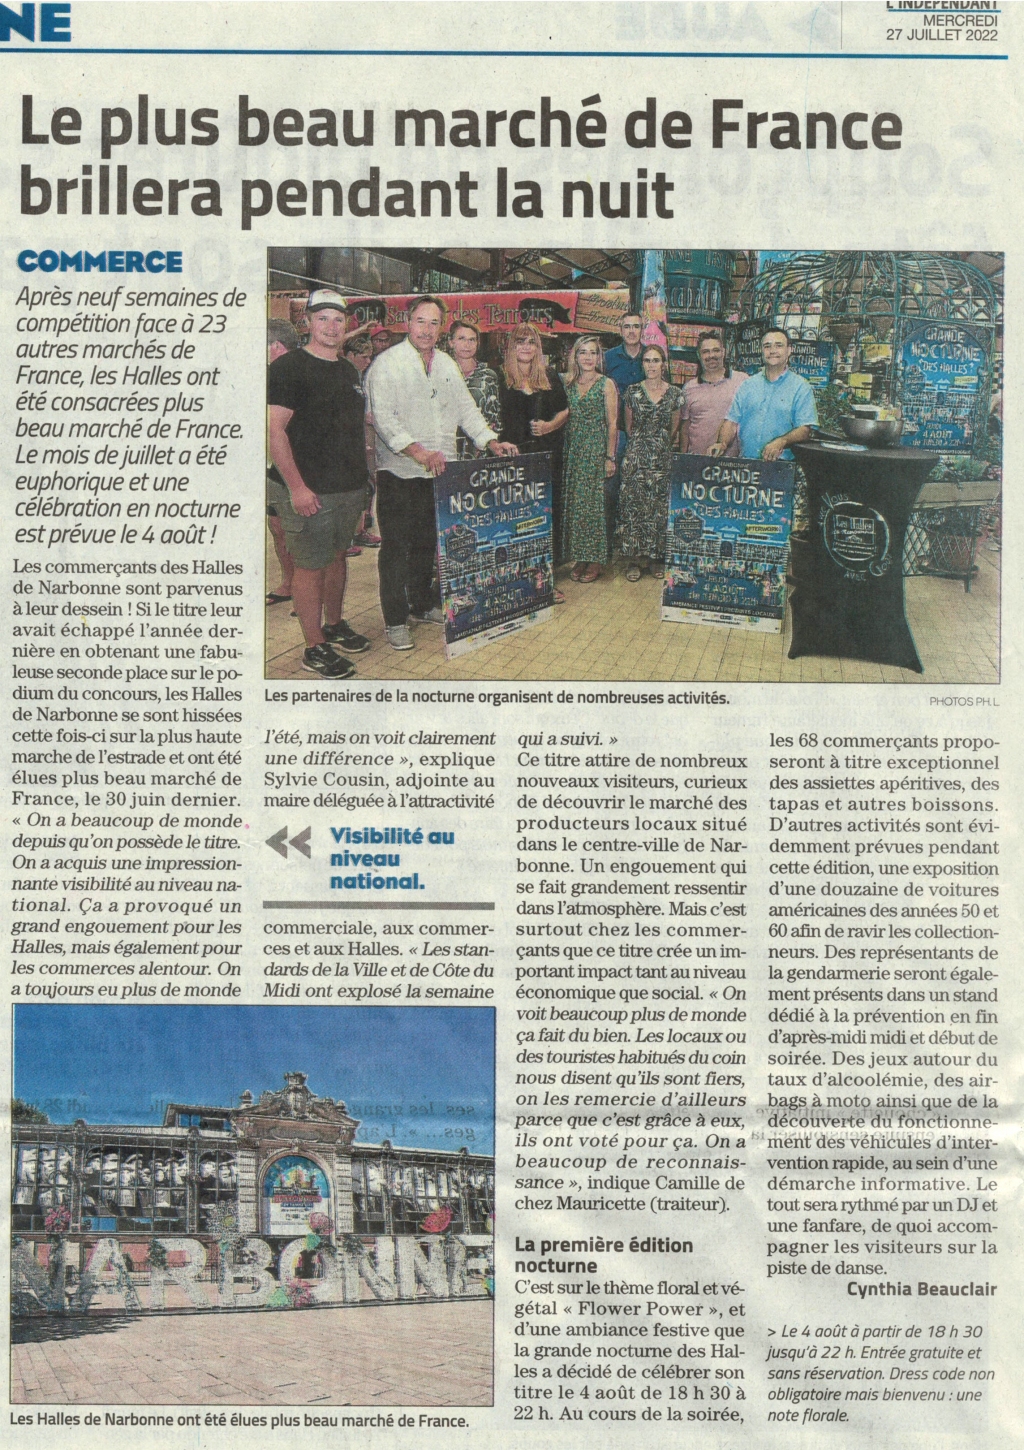 Annonce_nocturne_independant_narbonne_27-07-2022